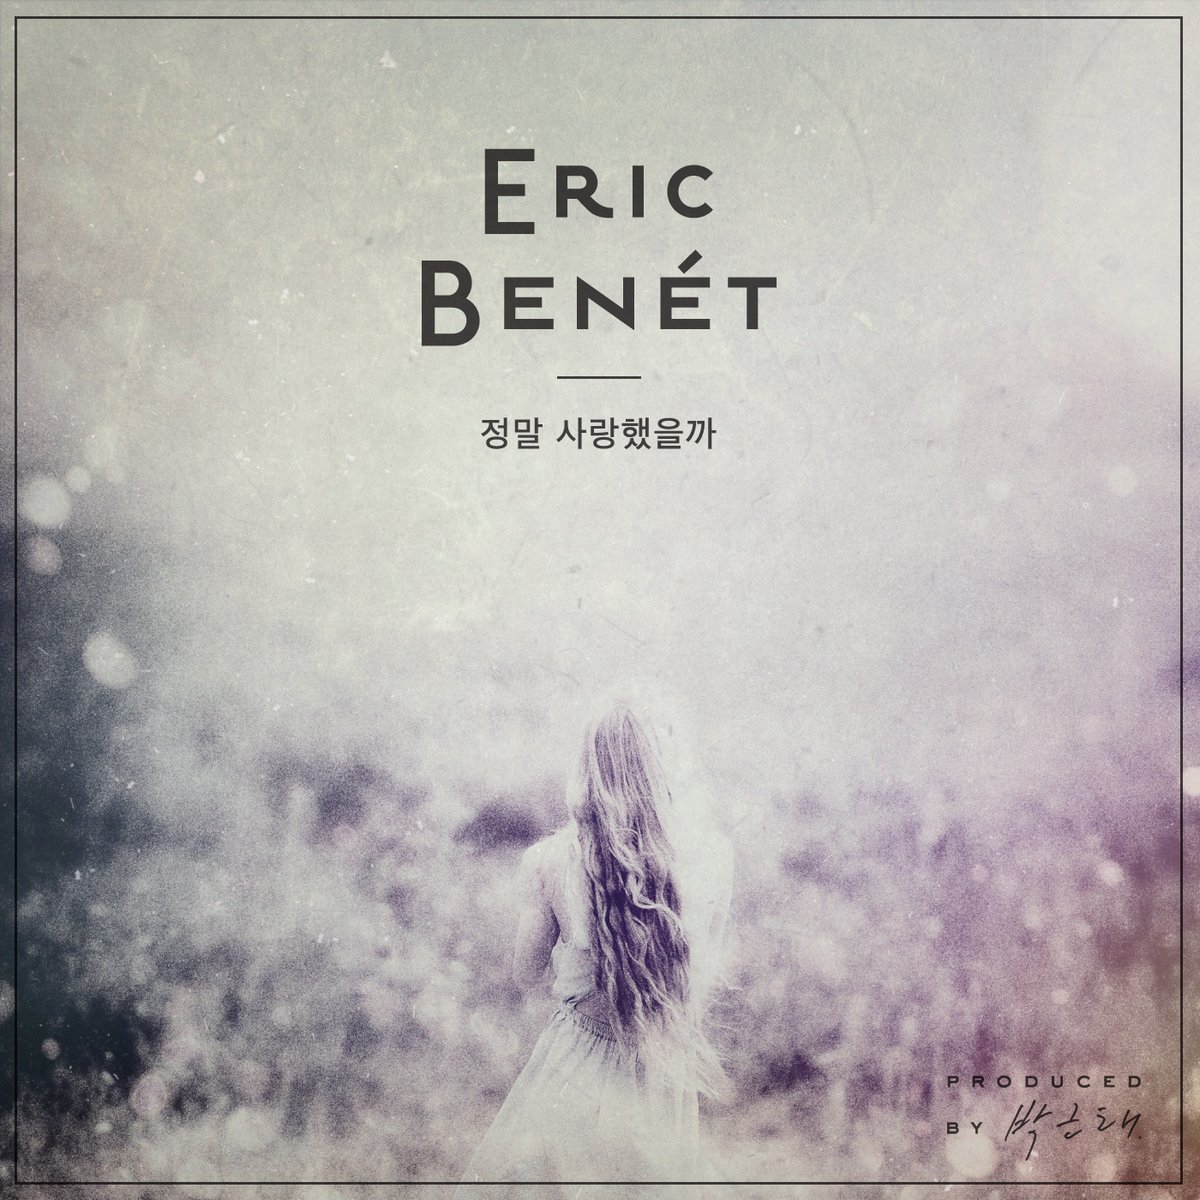 New Music: Eric Benet - Did We Really Love (Brown Eyed Soul Remake)